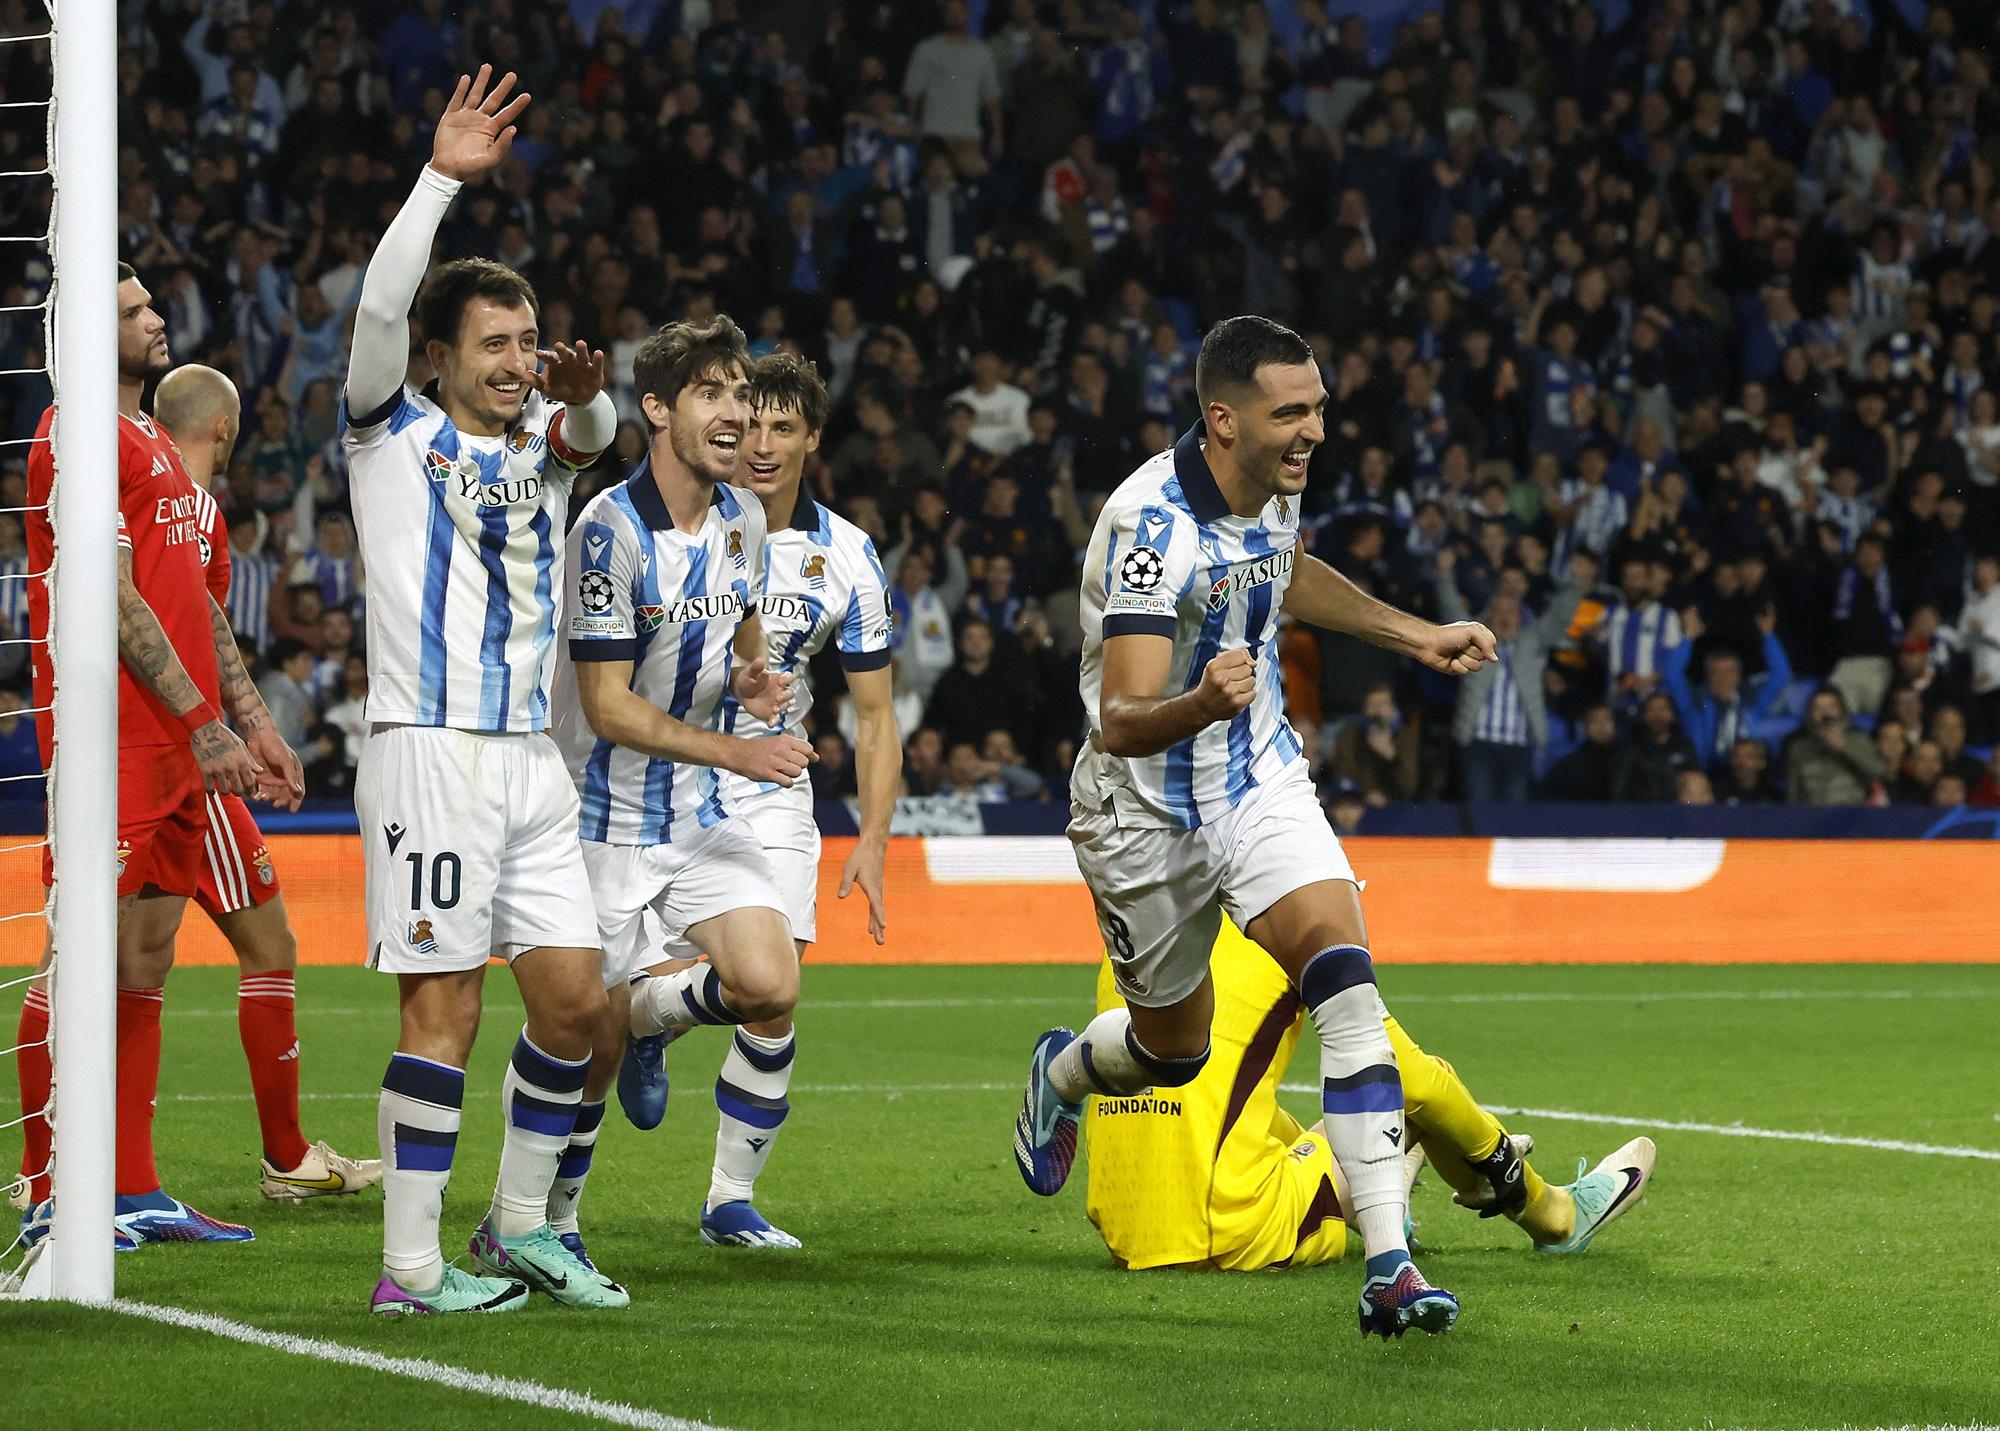 Champions League - Group D - Real Sociedad v Benfica